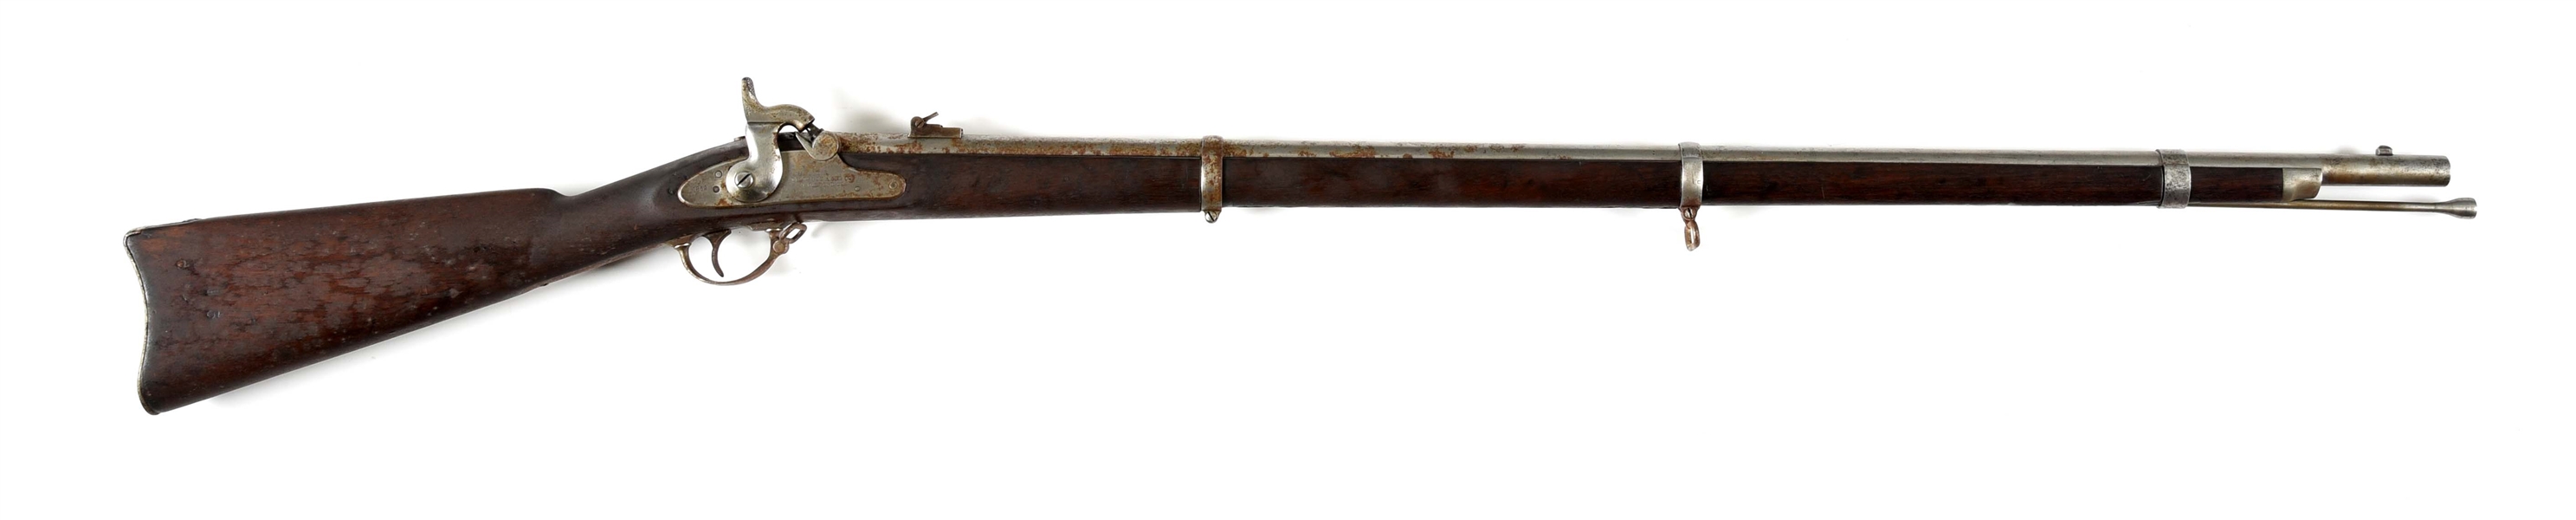 (A) COLT MODEL 1861 SPECIAL PERCUSSION MUSKET.